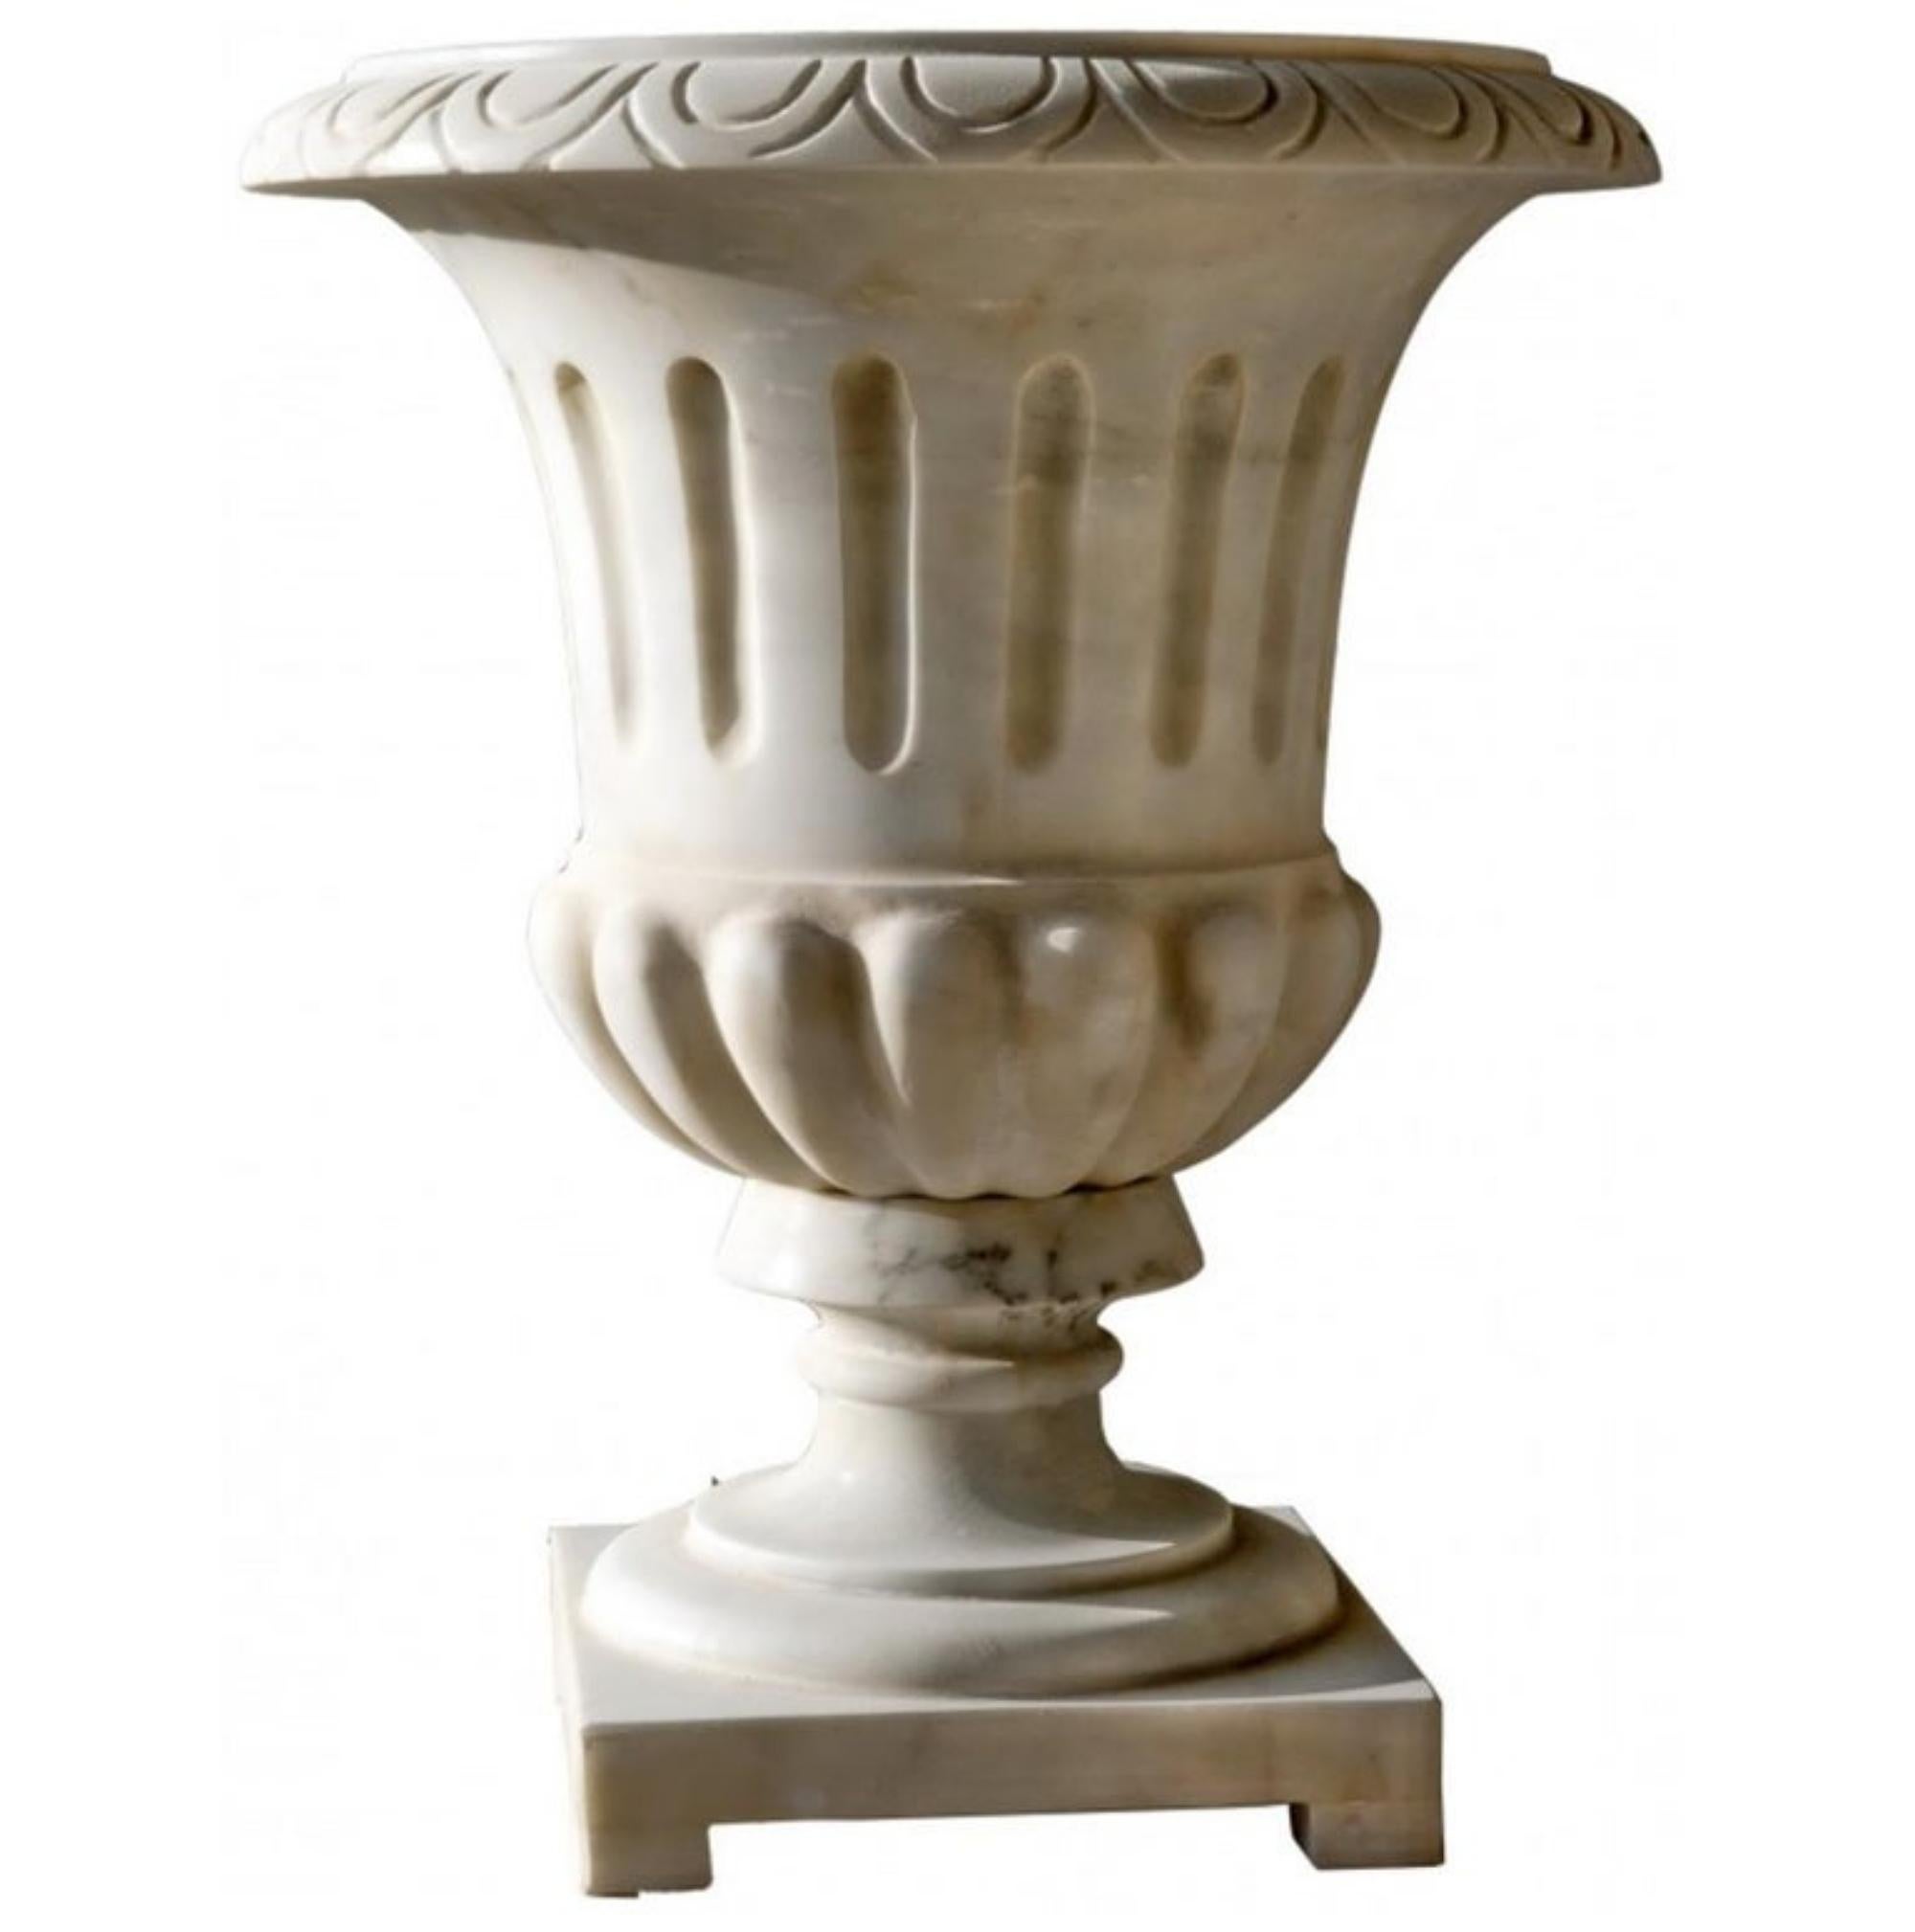 Modern Italian Vase in White Carrara Marble, Early 20th Century For Sale